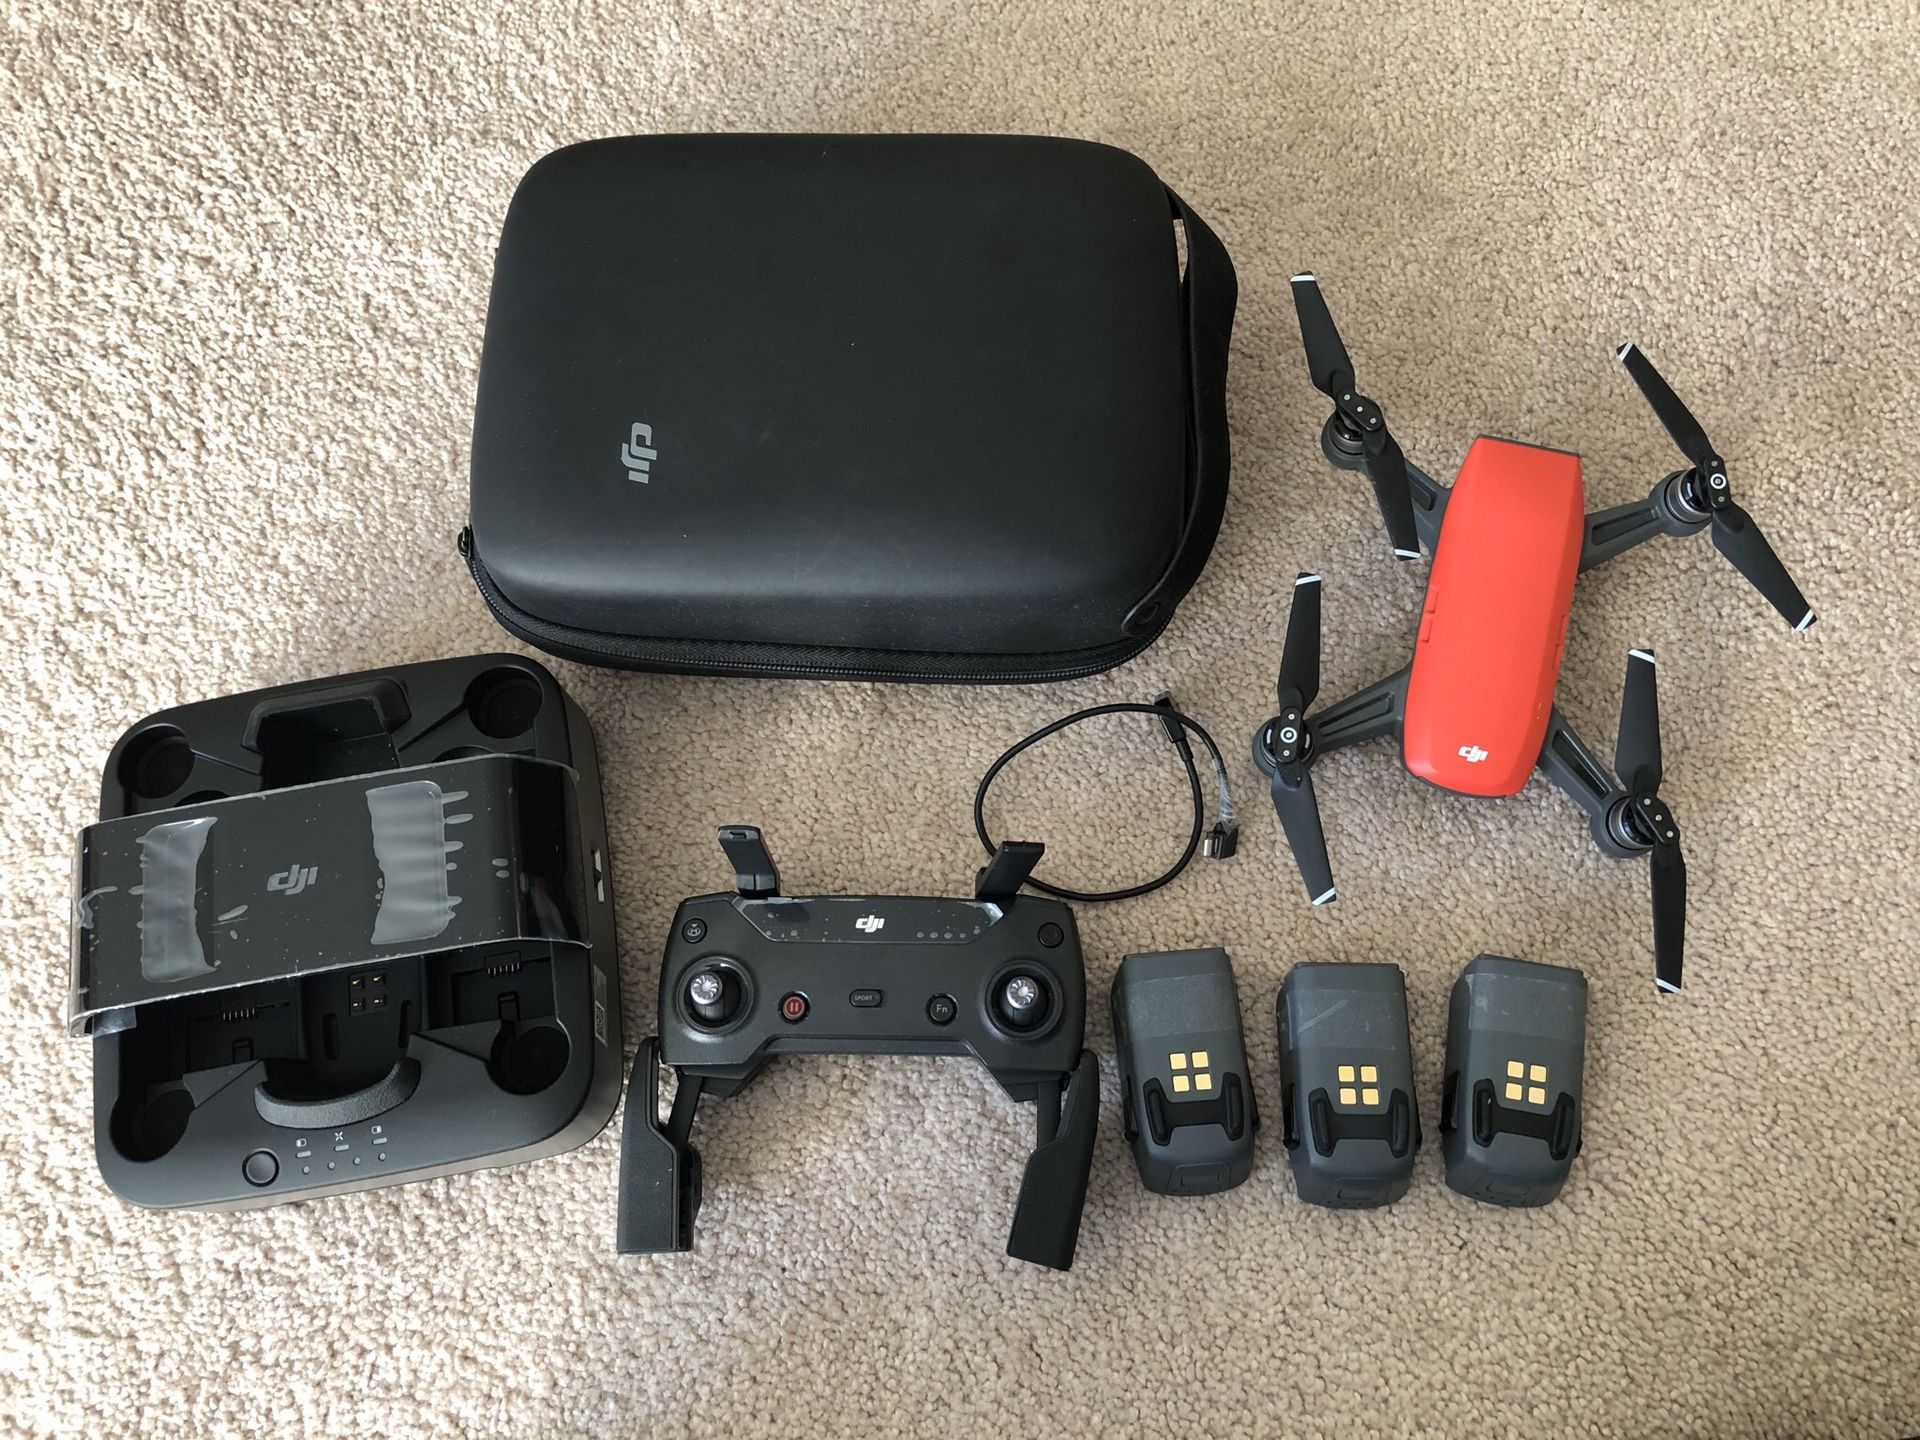 DJI Spark with case, power bank and 3 batteries